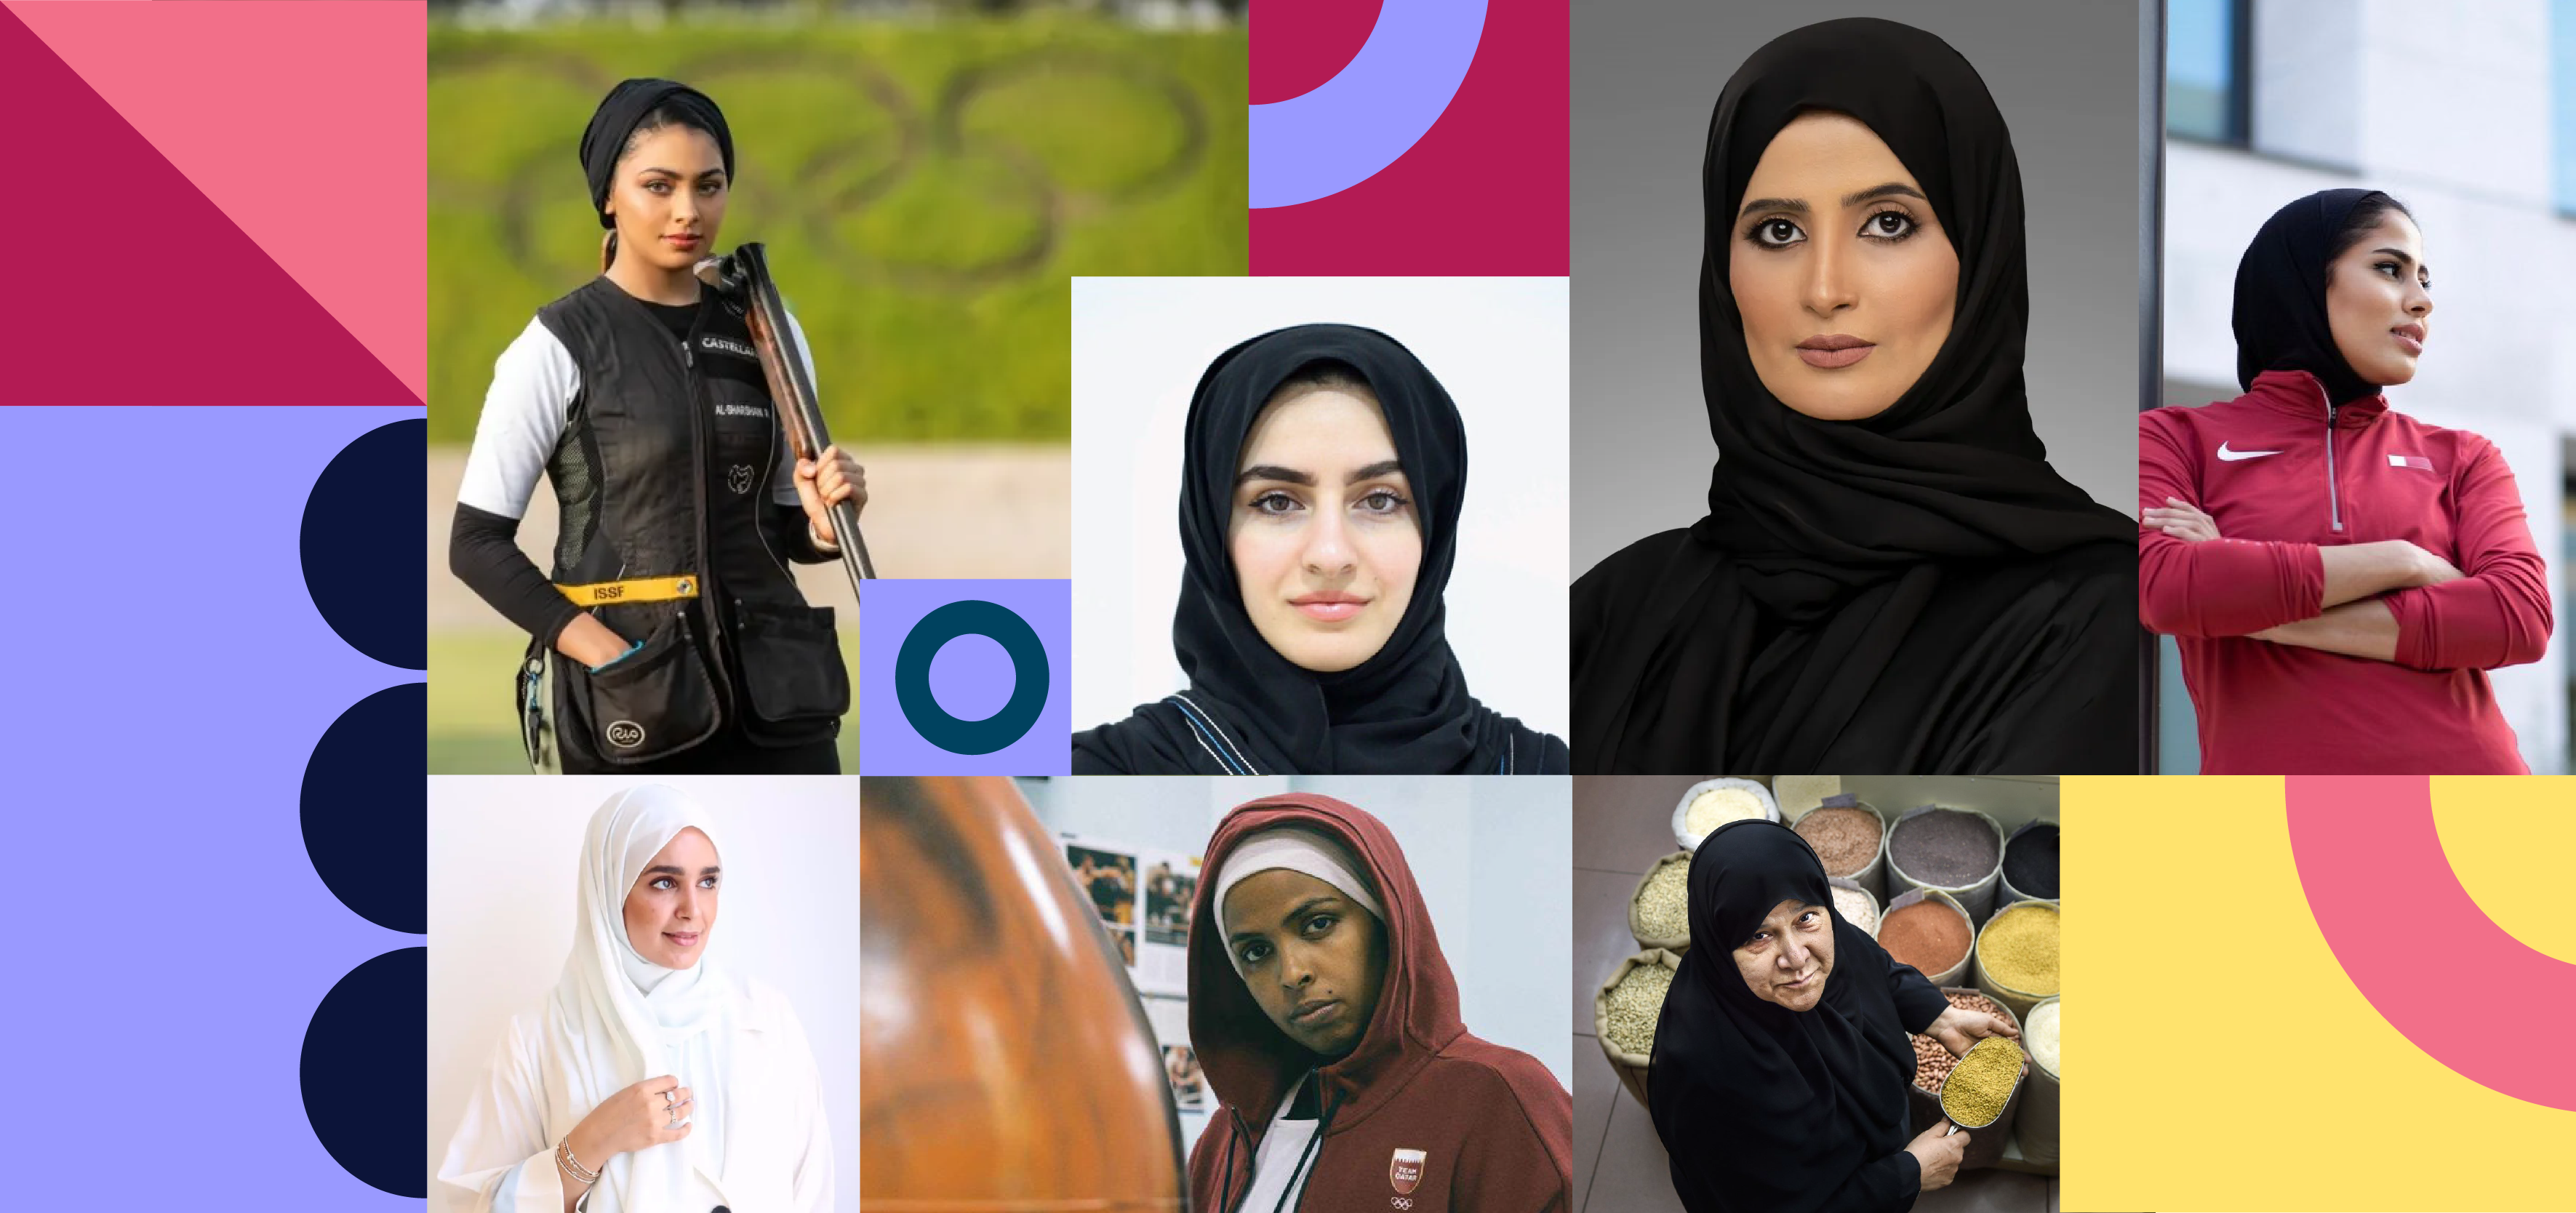 A mosiac of images of featured interviewees from the Women of Qatar website.